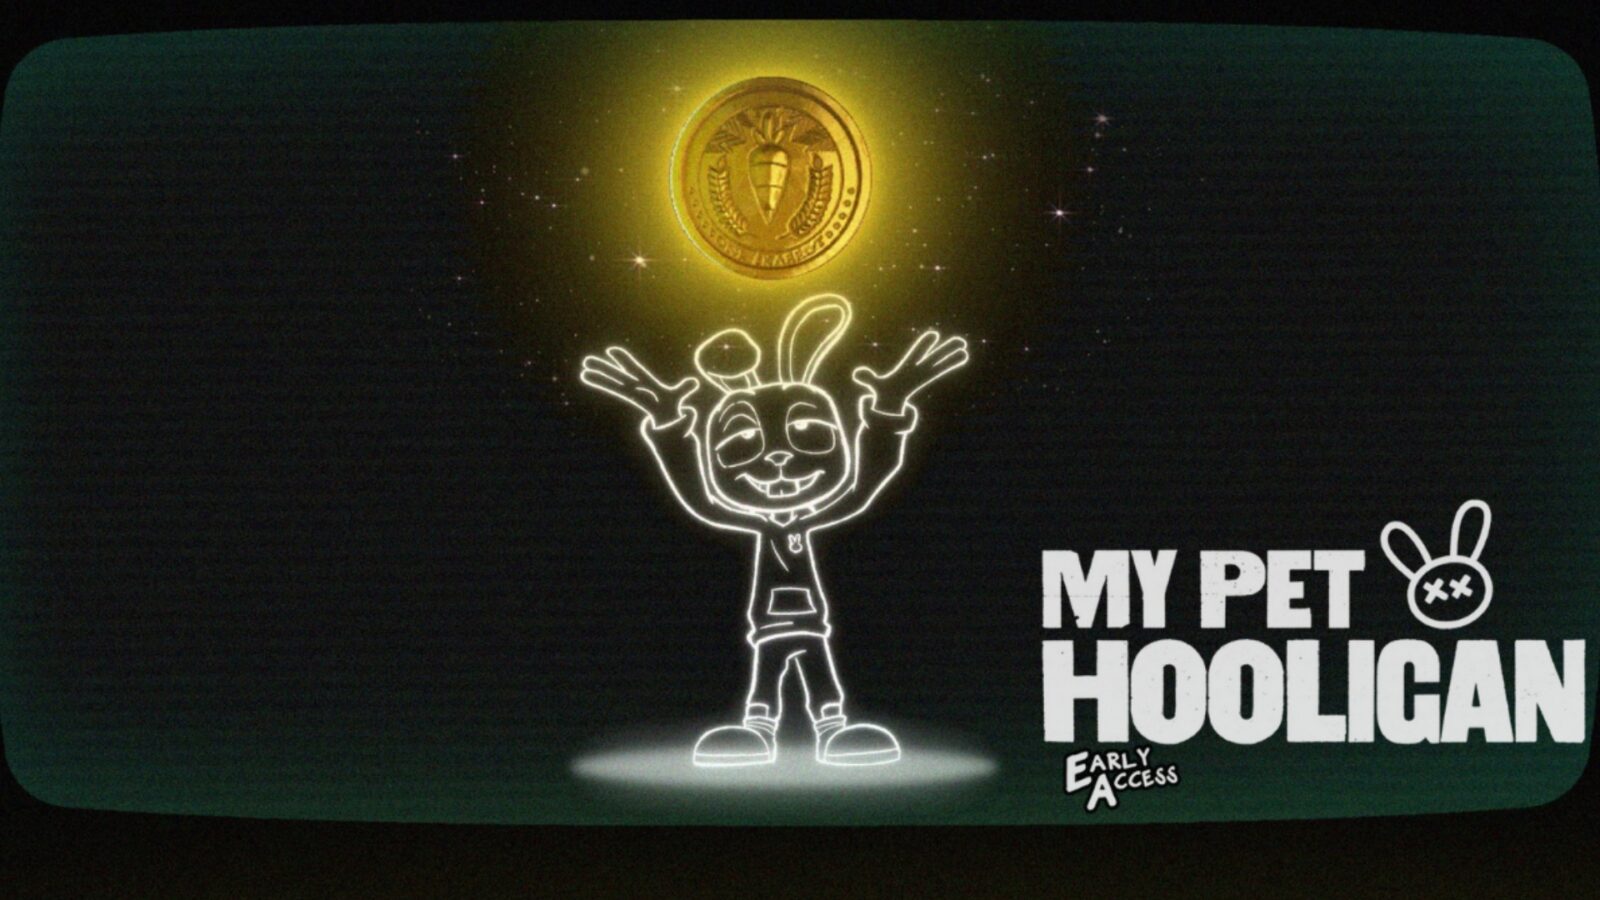 My Pet Hooligan The Next Gen Blockchain Game Thats Determined To Succeed Where Axie Infinity Failed The blockchain gaming industry is undergoing a rapid evolution, and the days of “play-to-earn” are rapidly disappearing over the horizon. With the emergence of a new generation of action-packed and visually spectacular blockchain games like My Pet Hooligan, players will no longer have to endure the repetitiveness of former hits like Axie Infinity. 